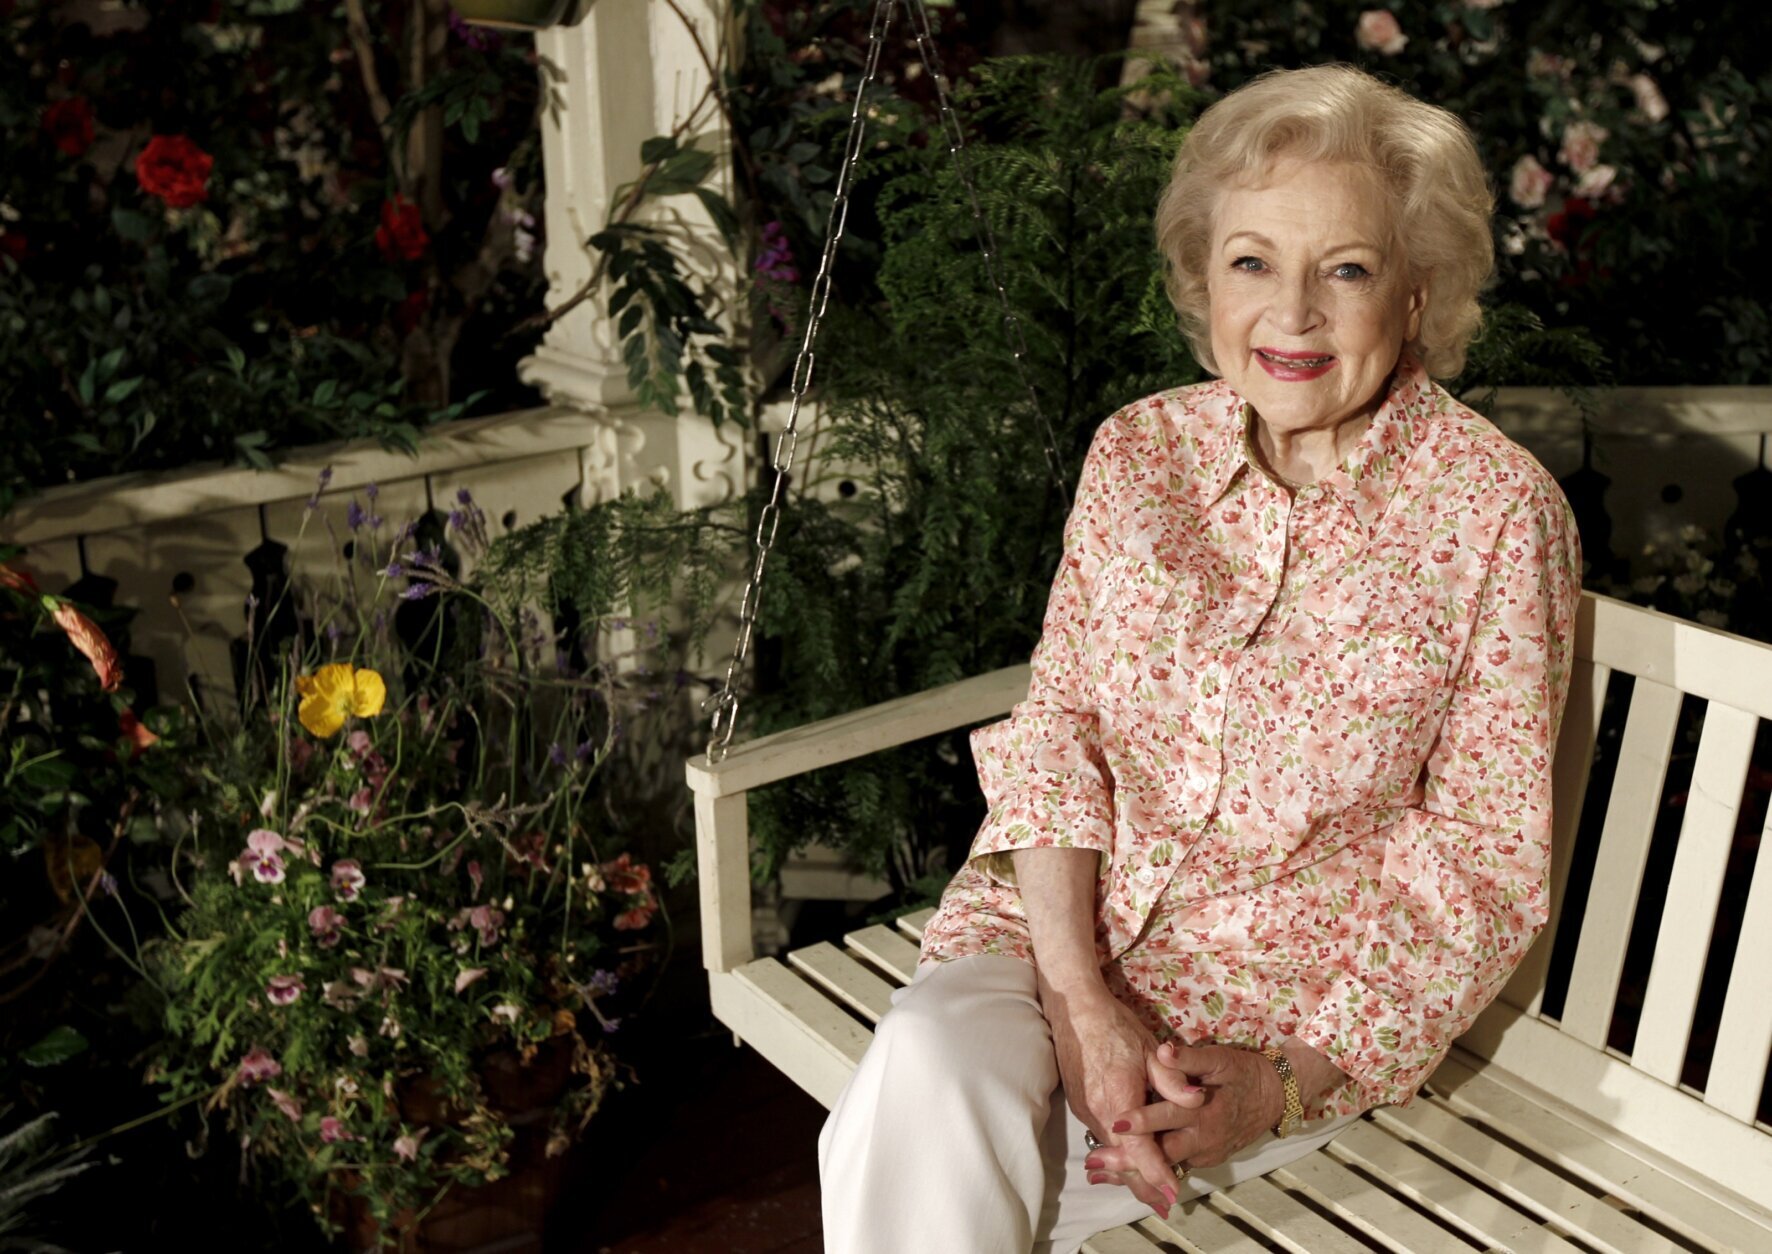 <p>FILE &#8211; Actress Betty White poses for a portrait on the set of the television show &#8220;Hot in Cleveland&#8221; in Studio City section of Los Angeles on Wednesday, June 9, 2010. Betty White, whose saucy, up-for-anything charm made her a television mainstay for more than 60 years, has died. She was 99. (AP Photo/Matt Sayles, File)</p>
